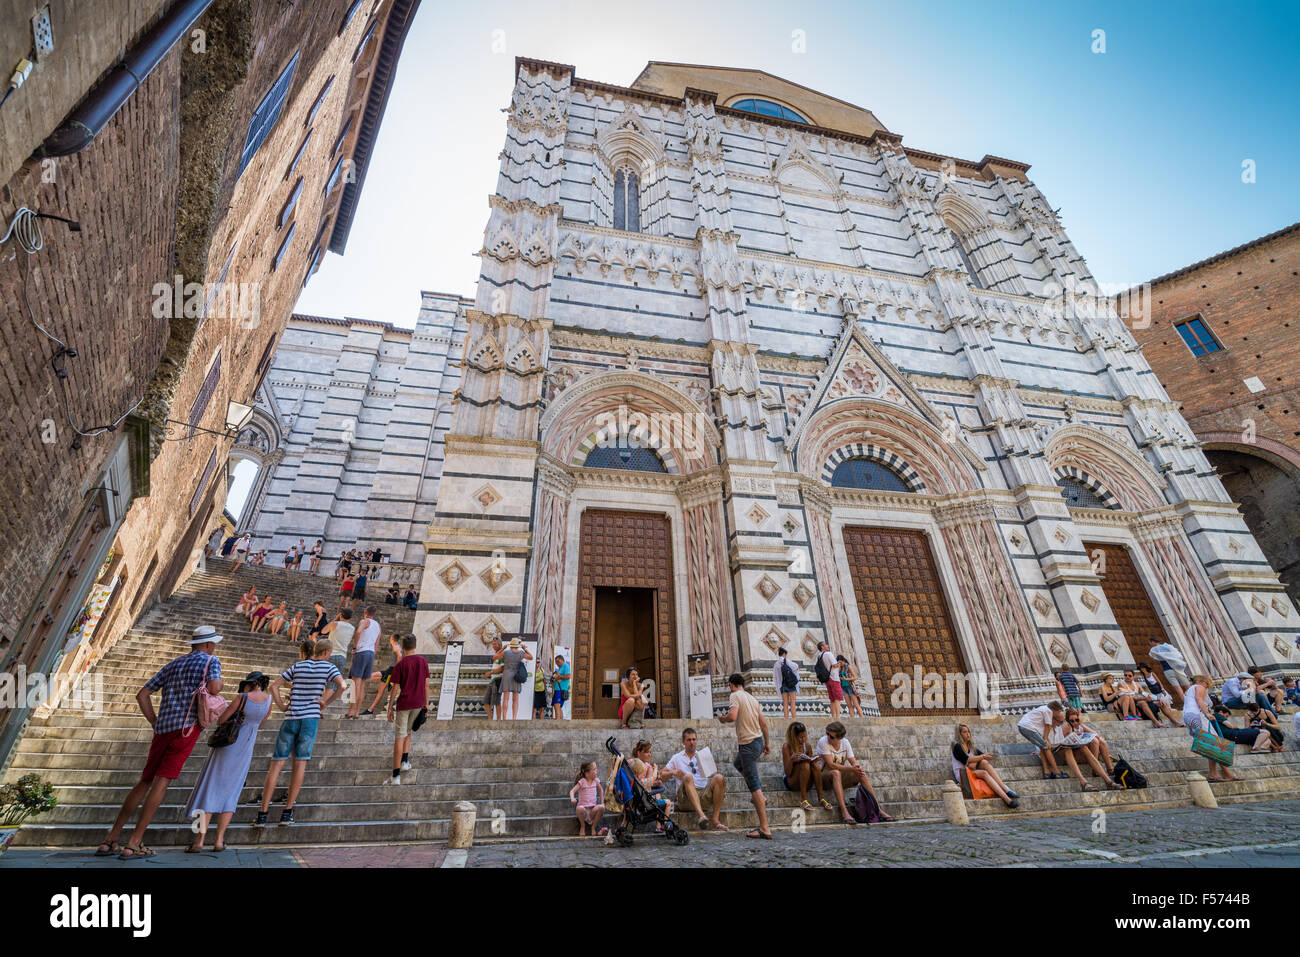 Entrance to the old baptistery in the town of Siena, Tuscany, Italy. Stock Photo